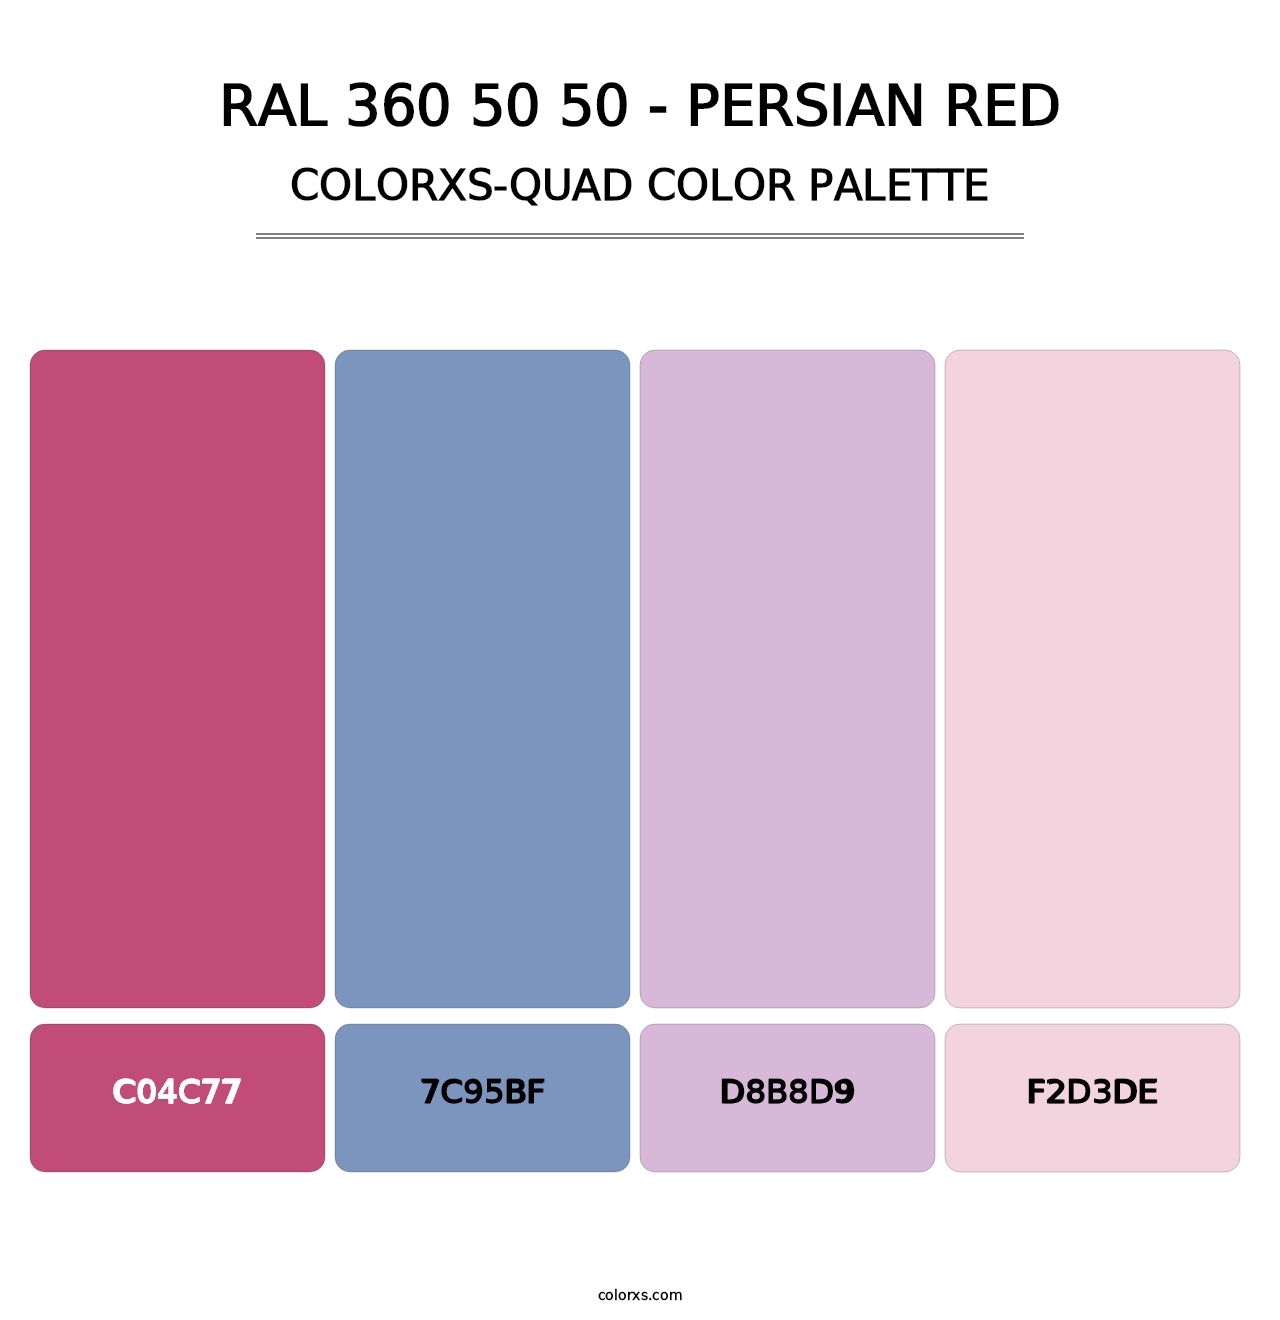 RAL 360 50 50 - Persian Red - Colorxs Quad Palette